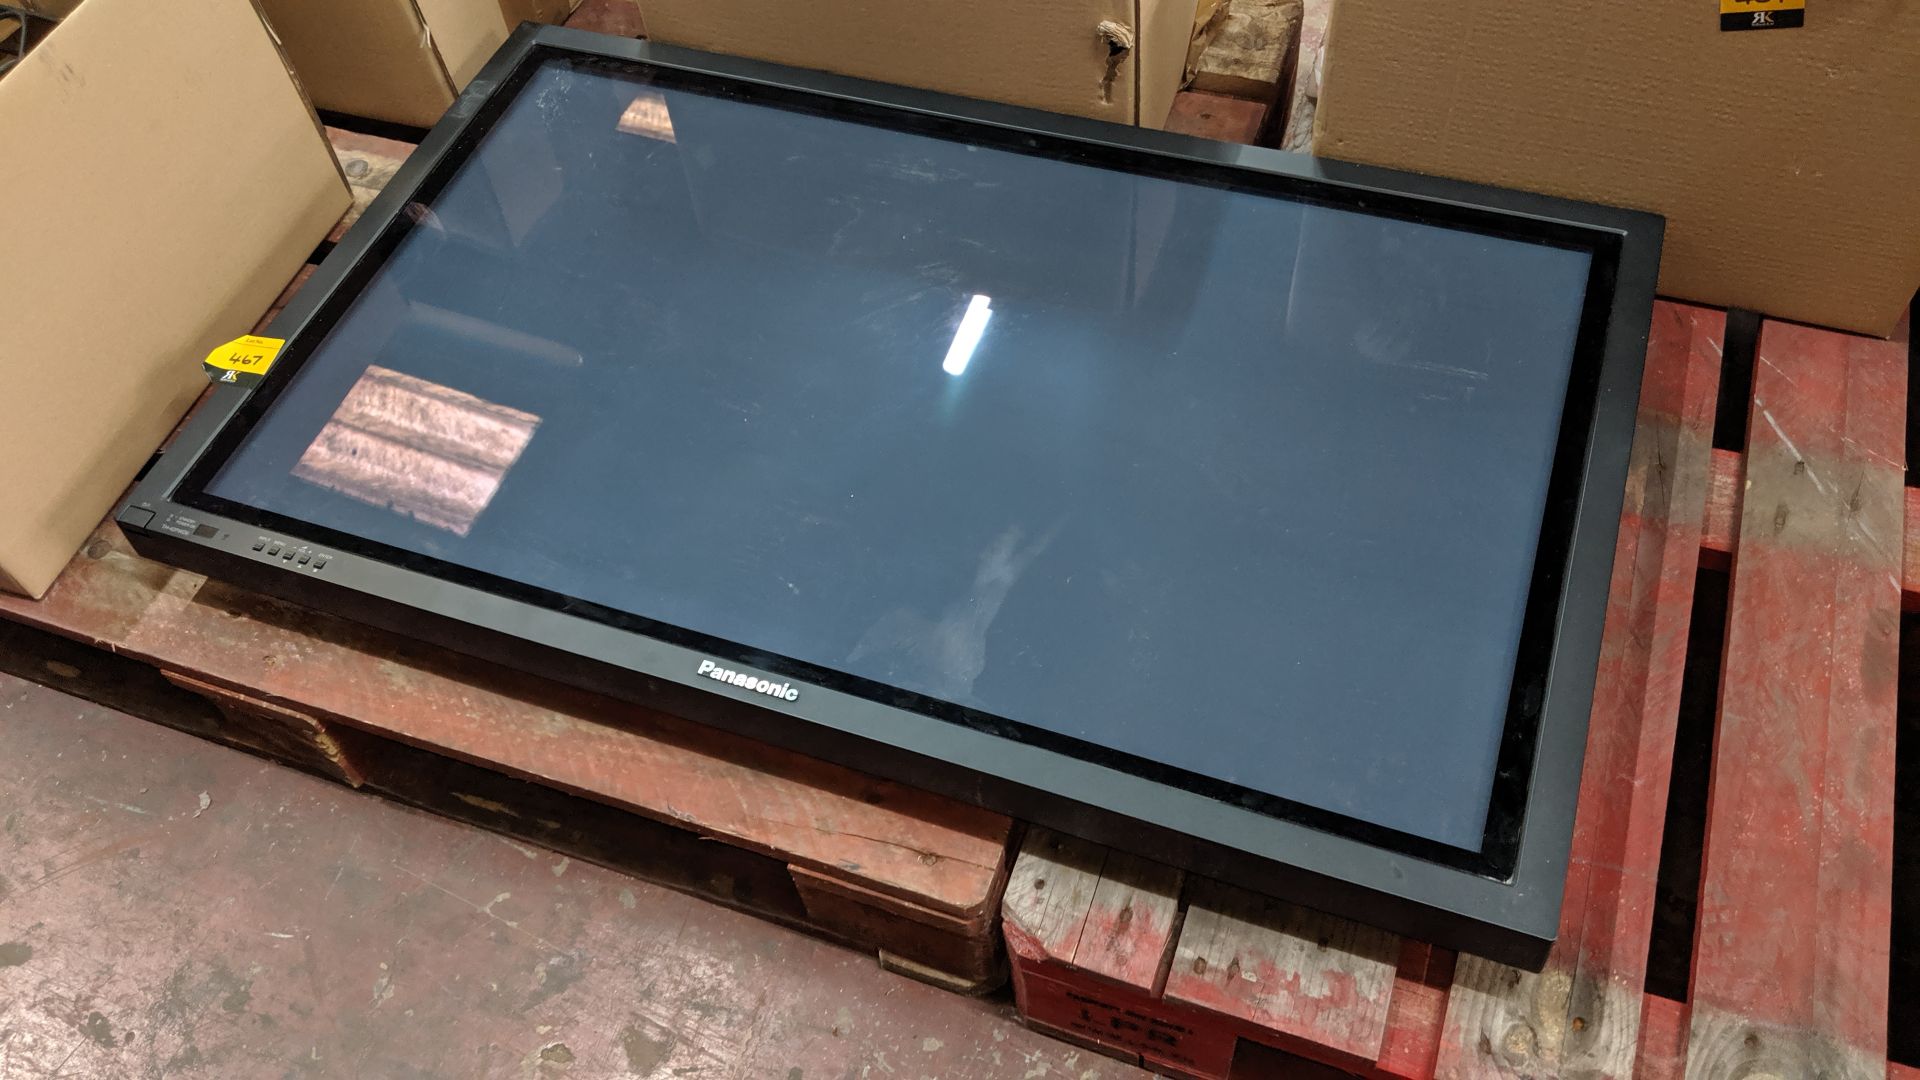 Panasonic 42" plasma TV model TH-42PWD6. This is one of a large number of lots being sold on - Image 3 of 3